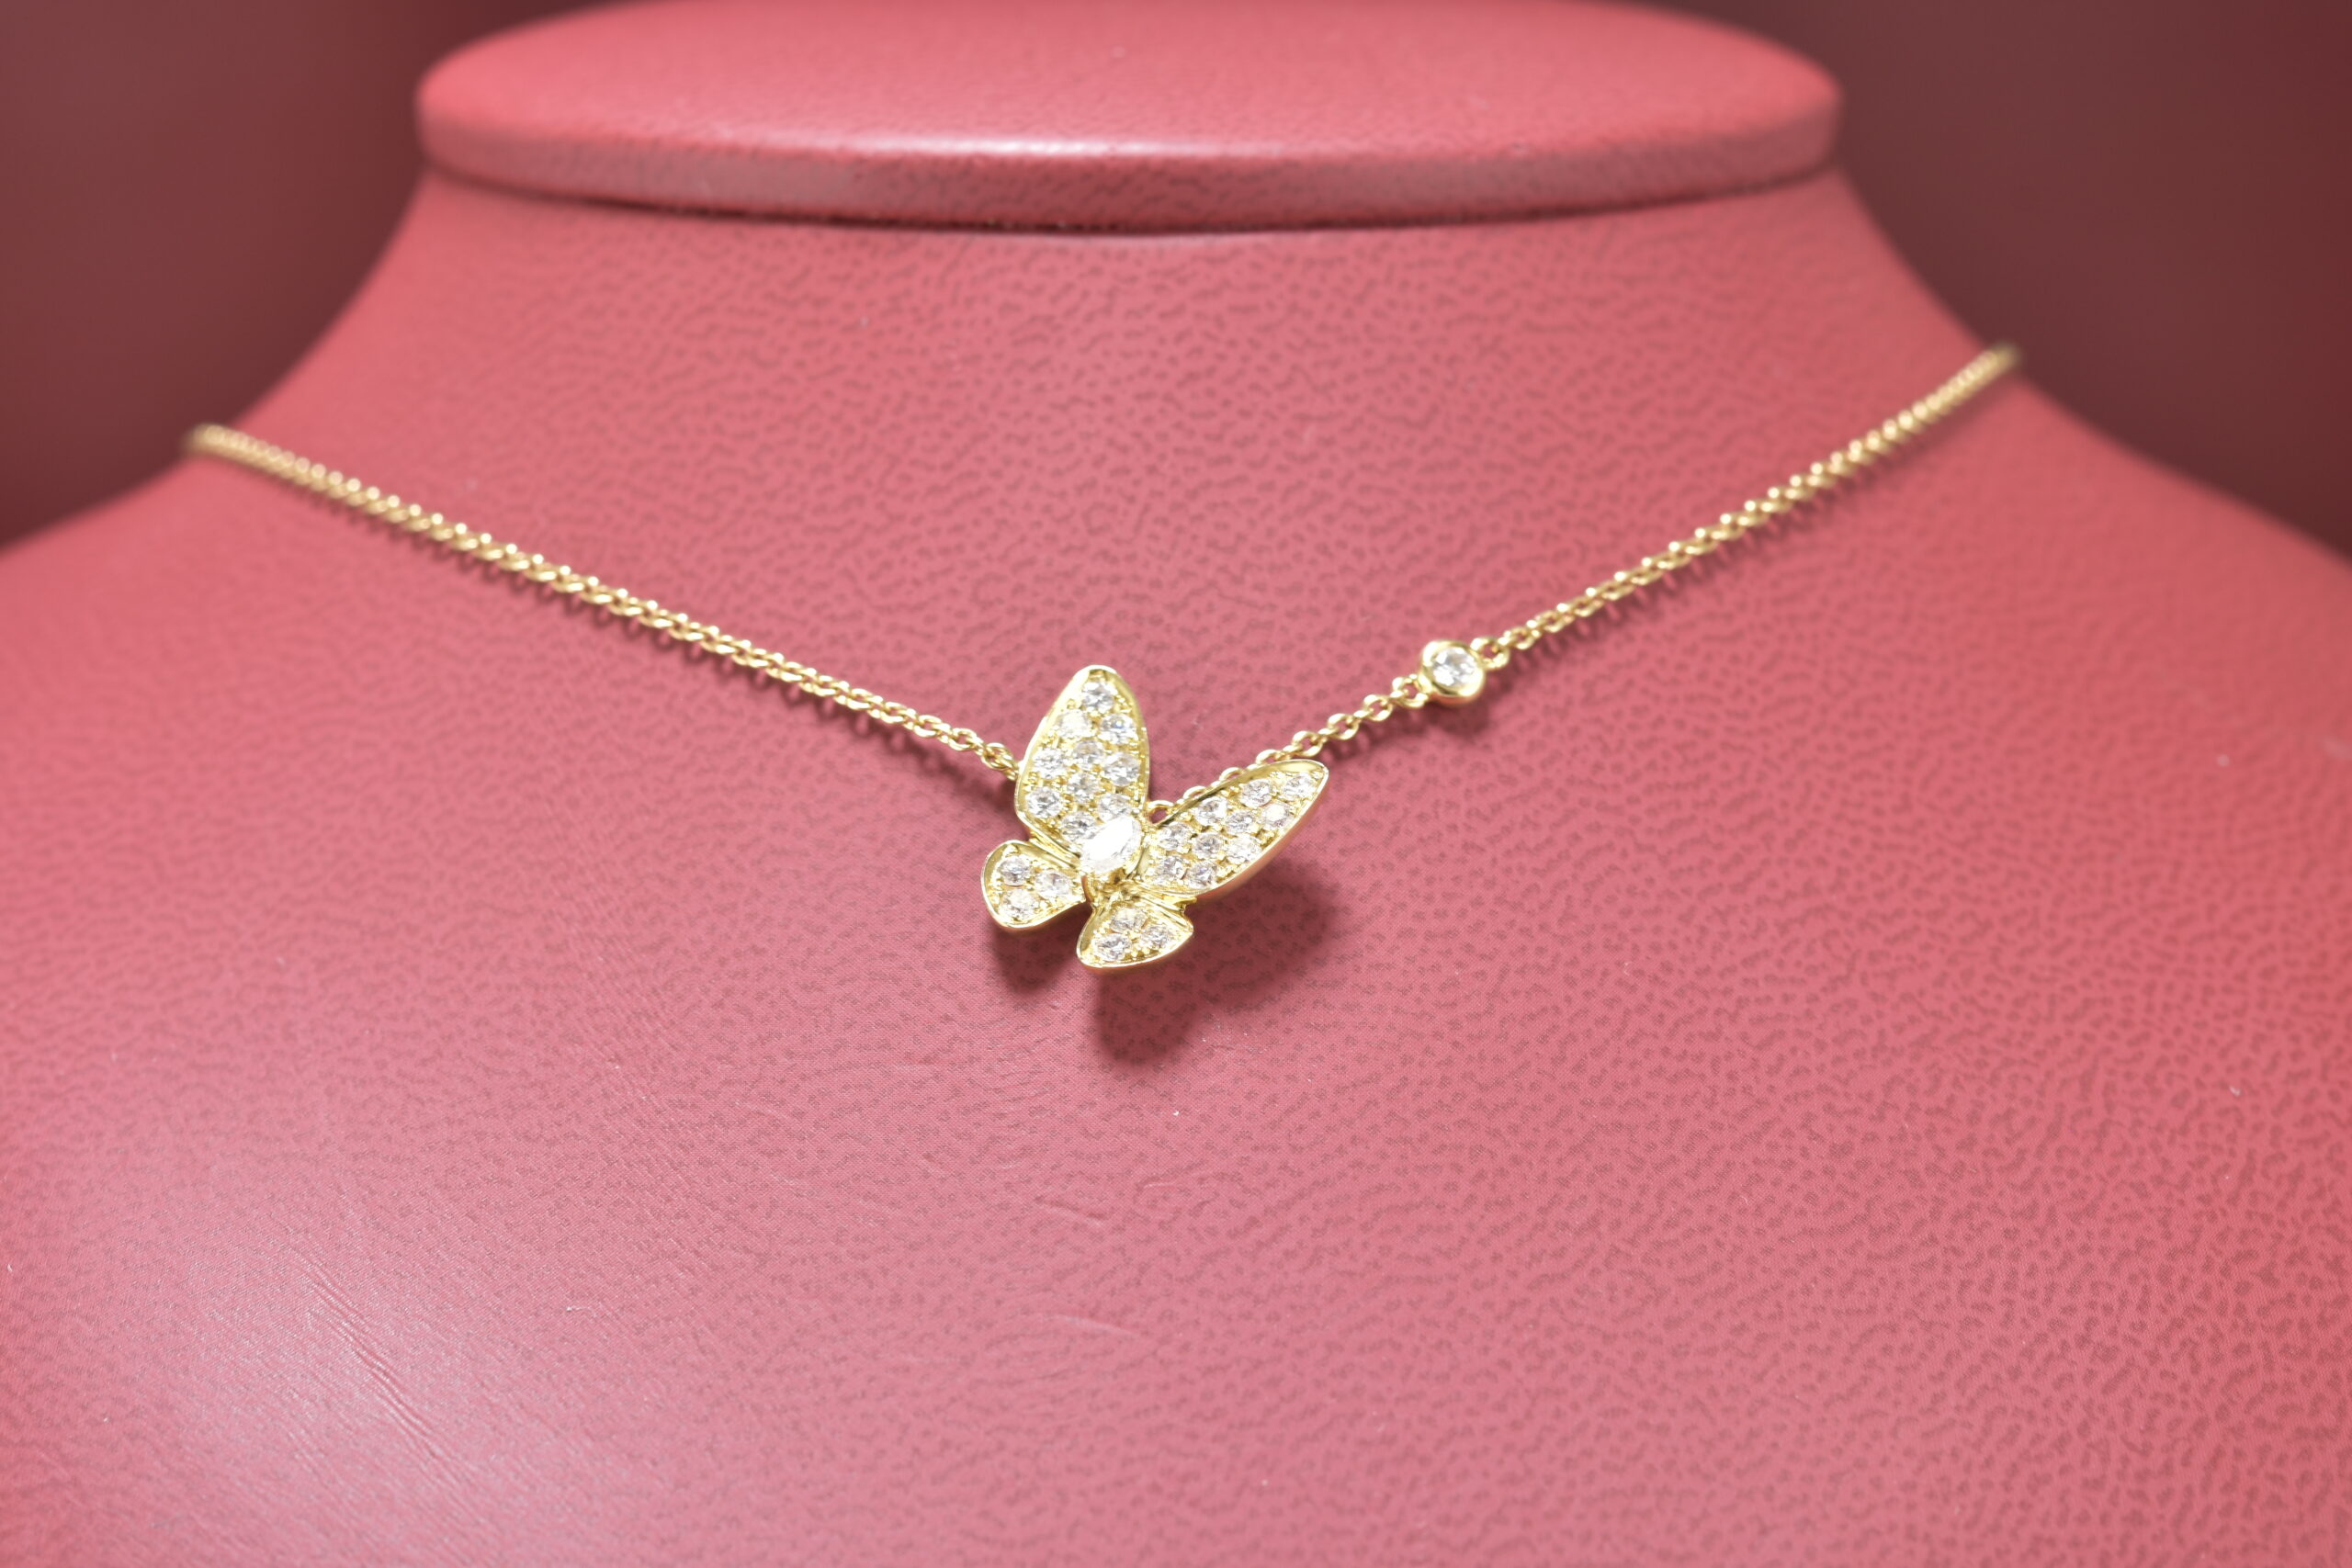 Diamond Butterfly Pendant on Yellow Gold Chain - Nathan Alan Jewelers